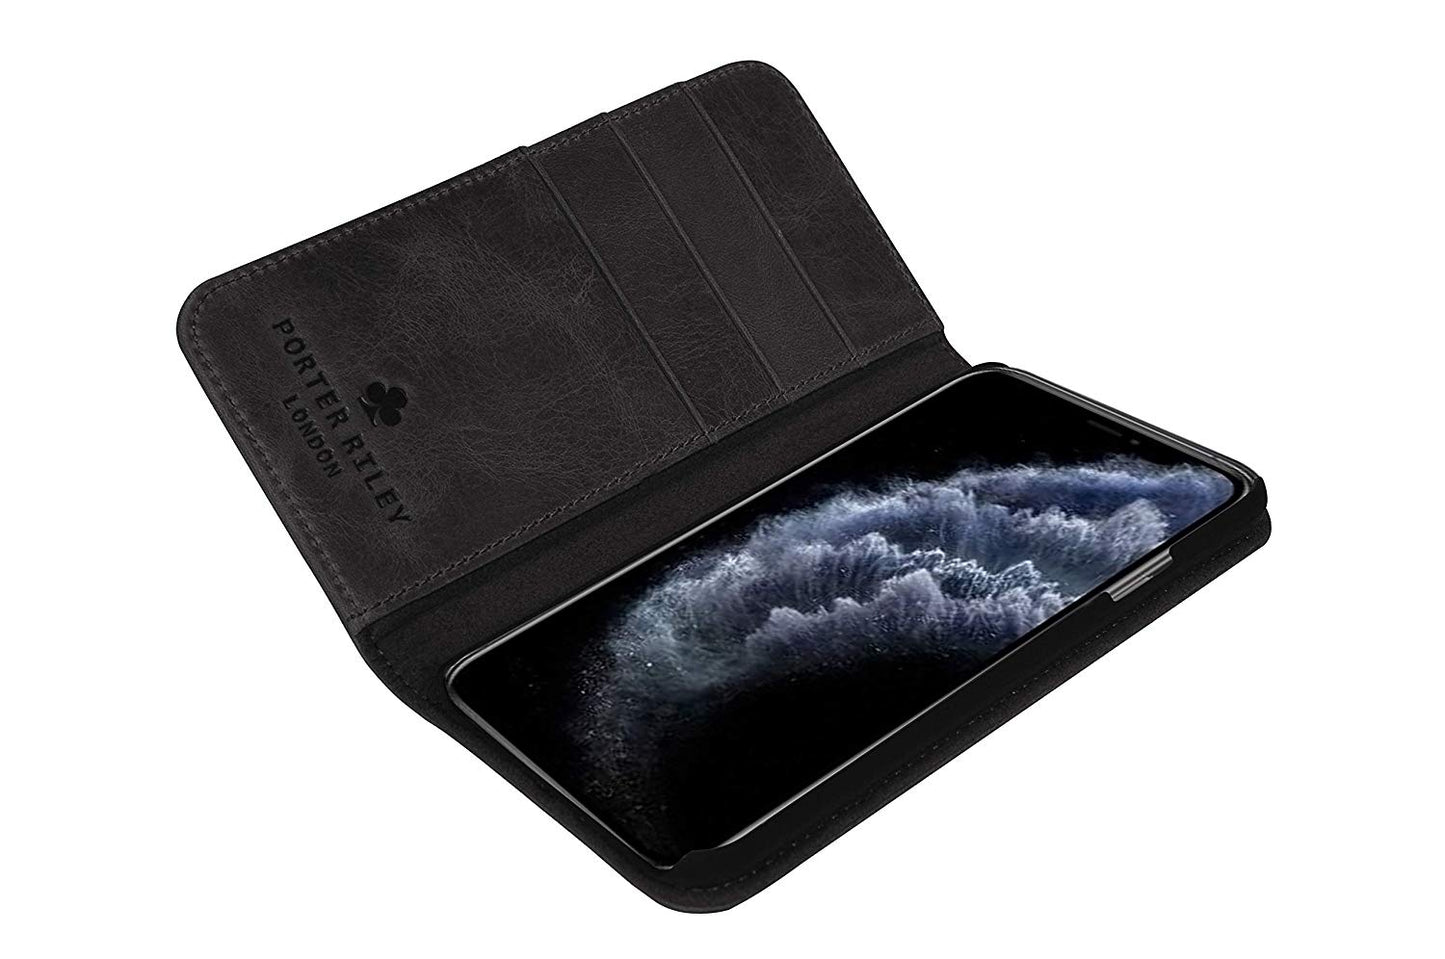 iPhone 11 Pro Max Leather Case. Premium Slim Genuine Leather Stand Case/Cover/Wallet (Pure Black)